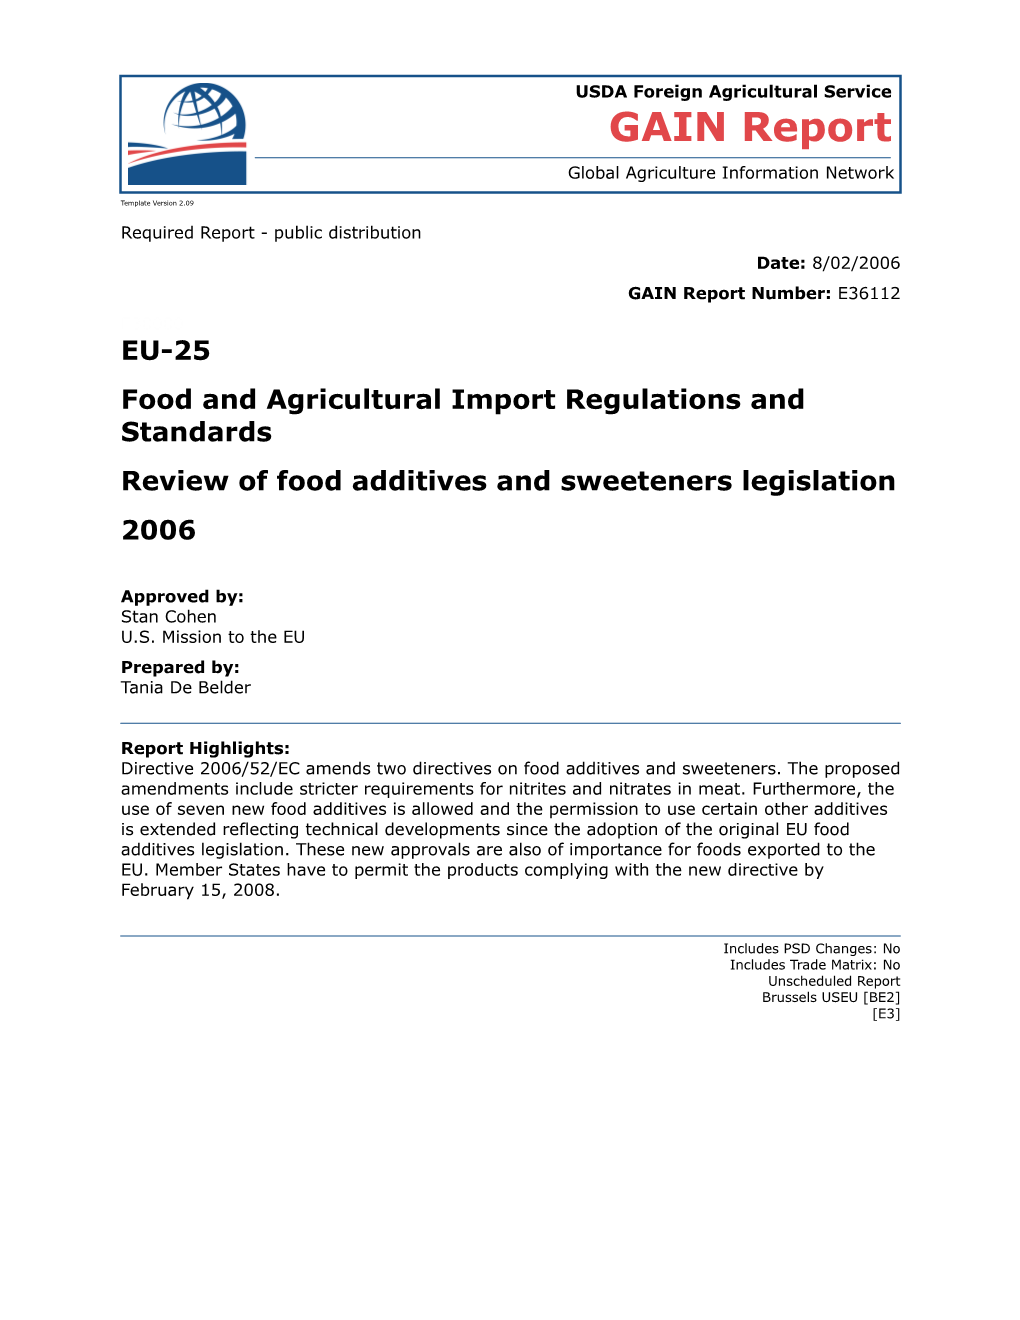 Food and Agricultural Import Regulations and Standards s15